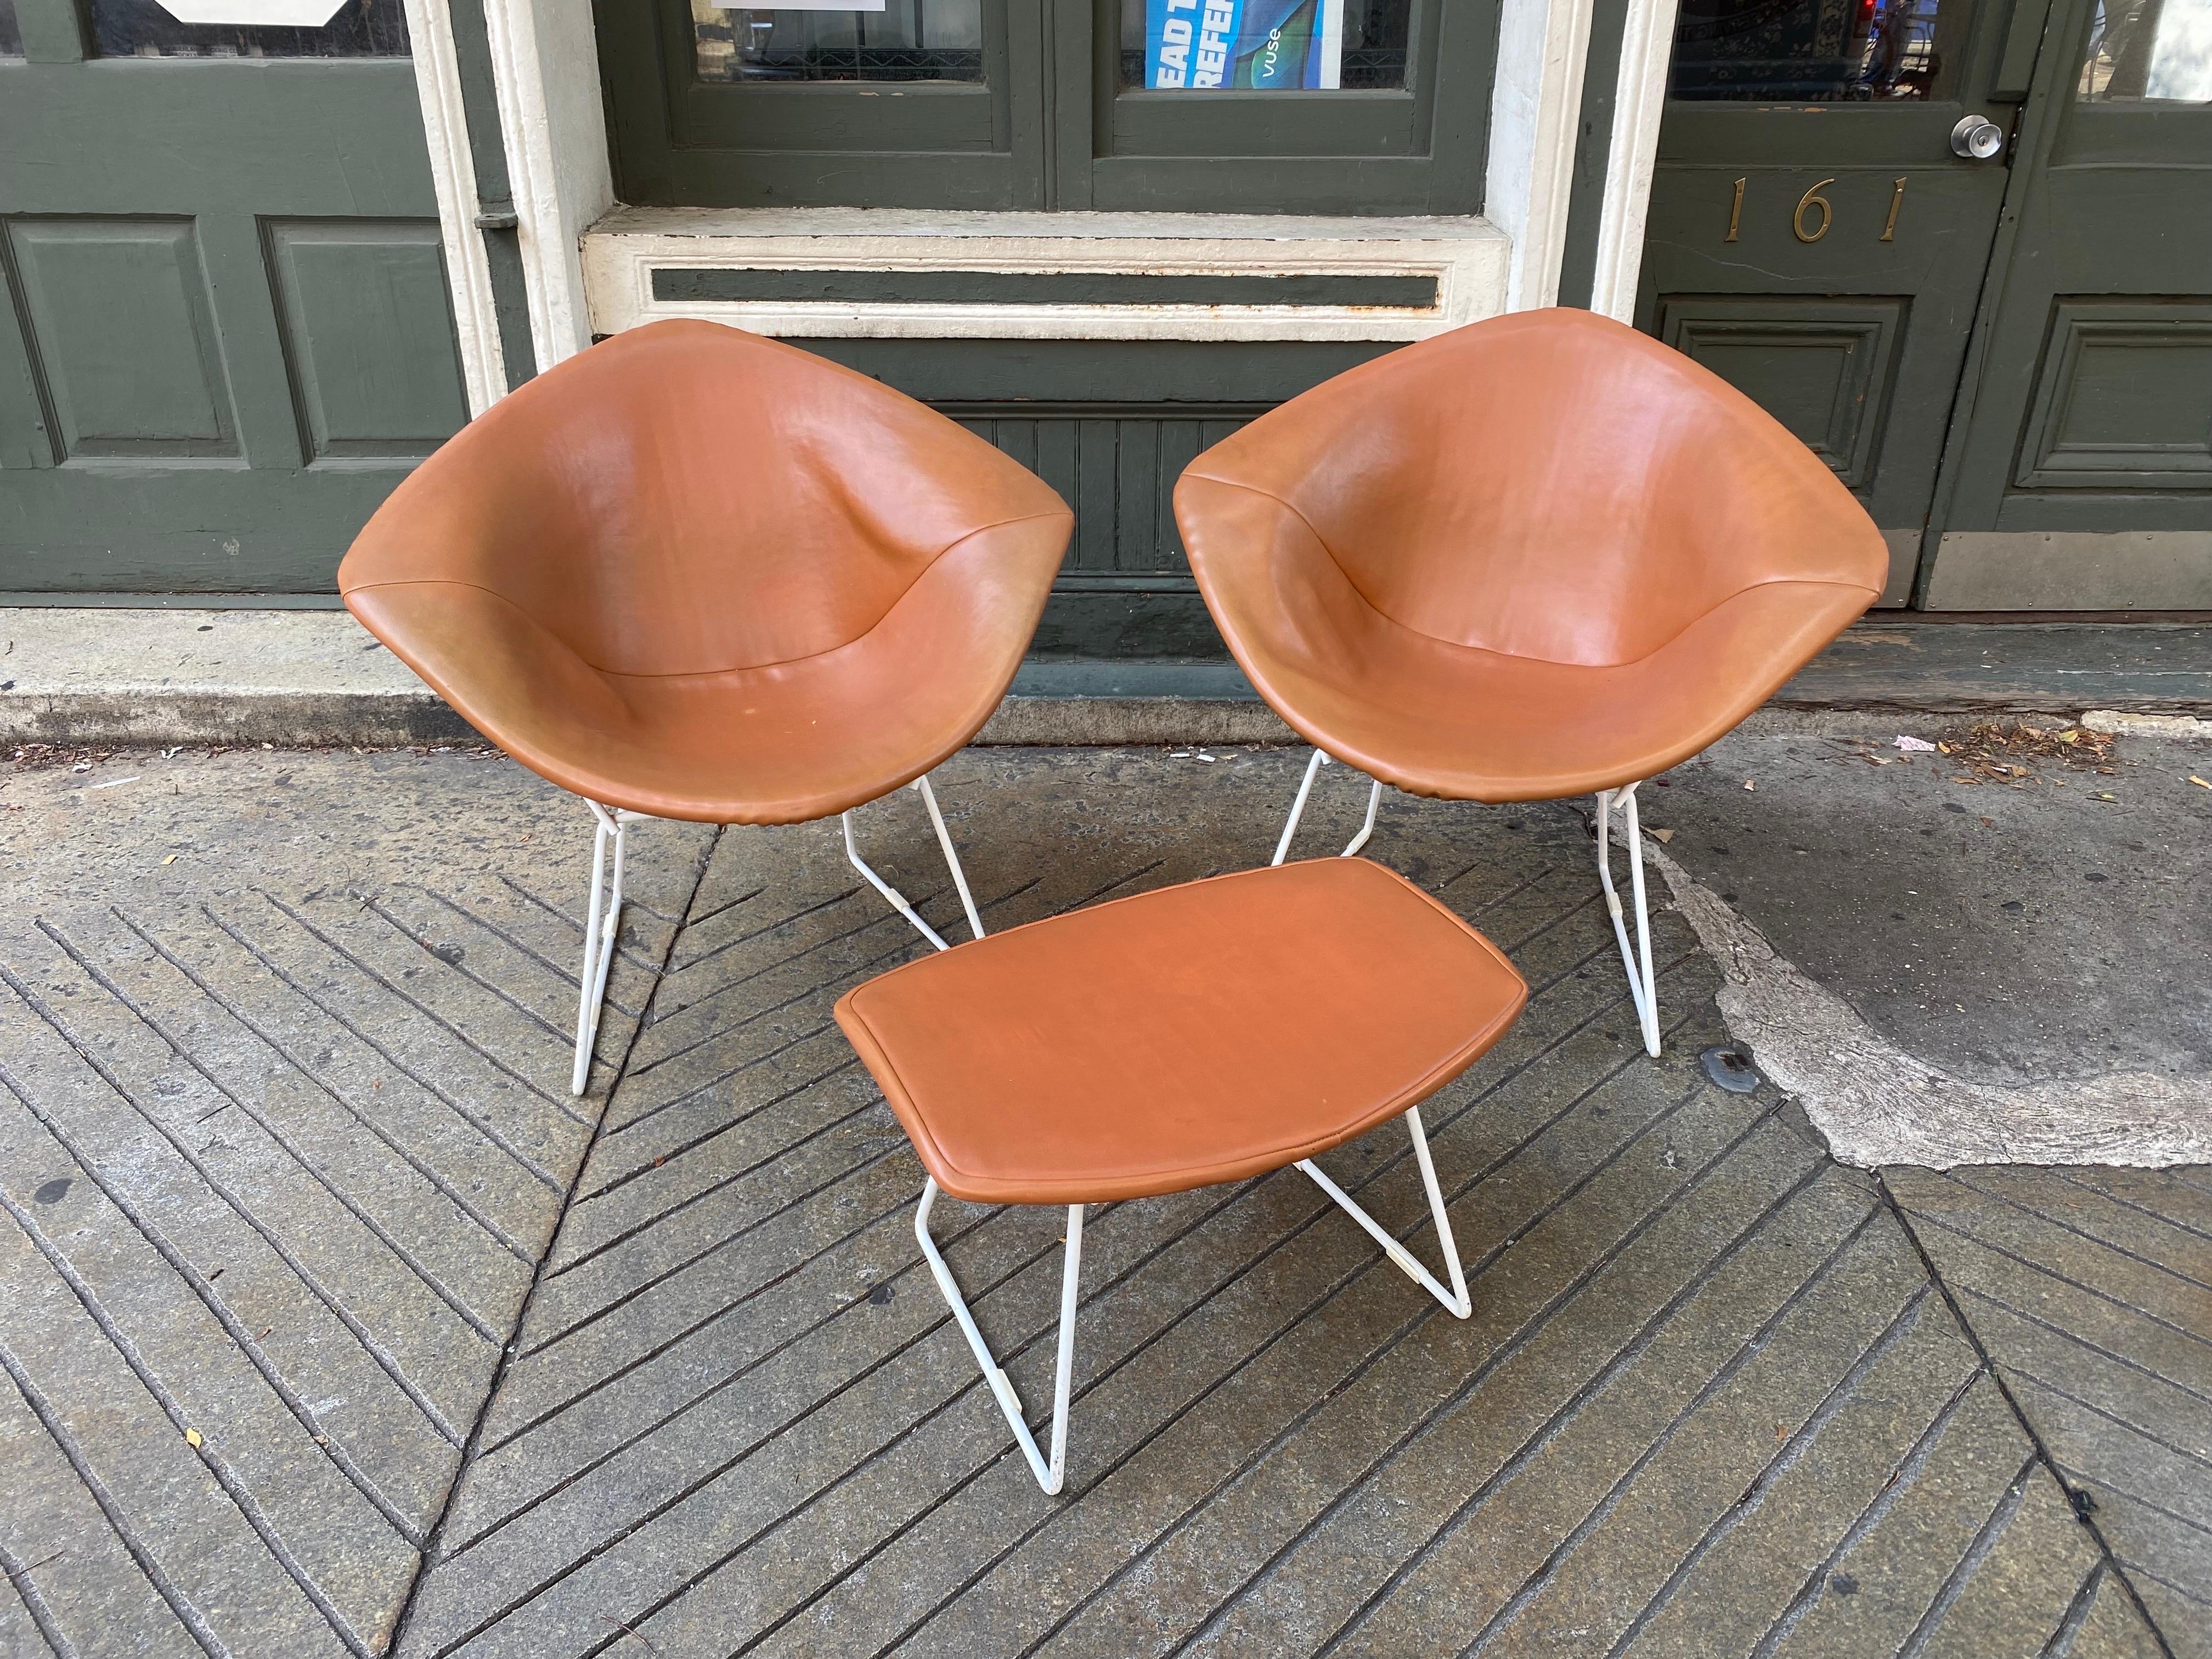 Harry Bertoia for Knoll pair of small diamond chairs with matching ottoman.  Set probably dates to the mid 1970's.  Vinyl seats with cloth backing that you see through the cage of chairs from behind.  There is one light spot on vinyl as seen in